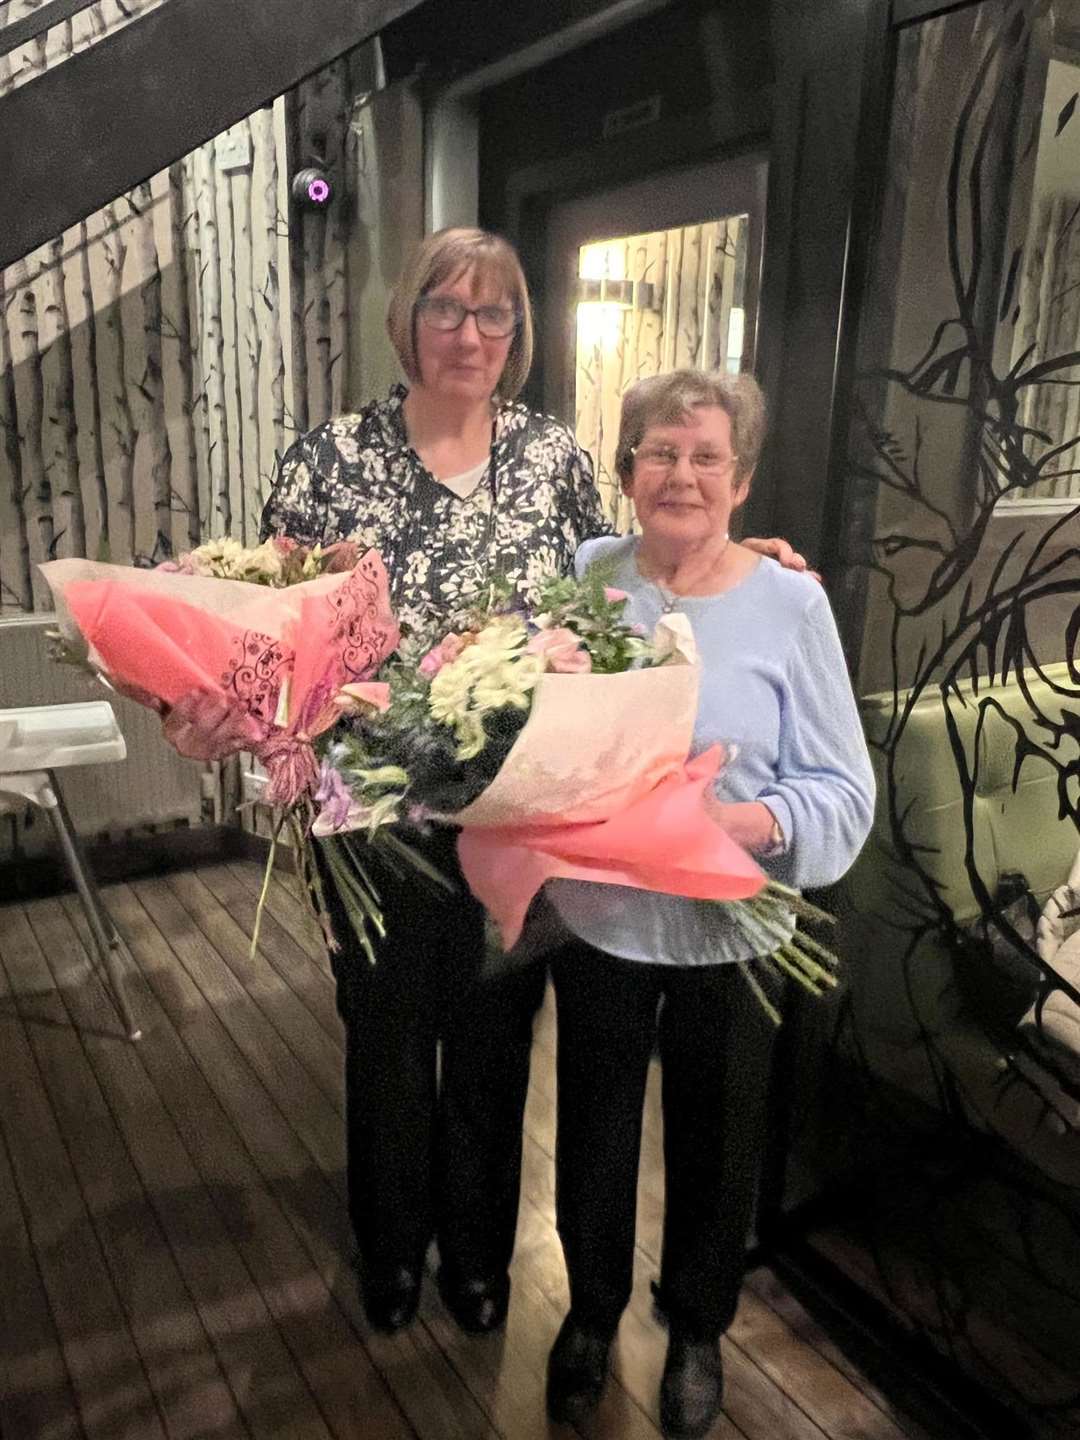 Joyce Reid (right) and Maureen Webster were presented with flowers on their retiral from Reids Bakery.